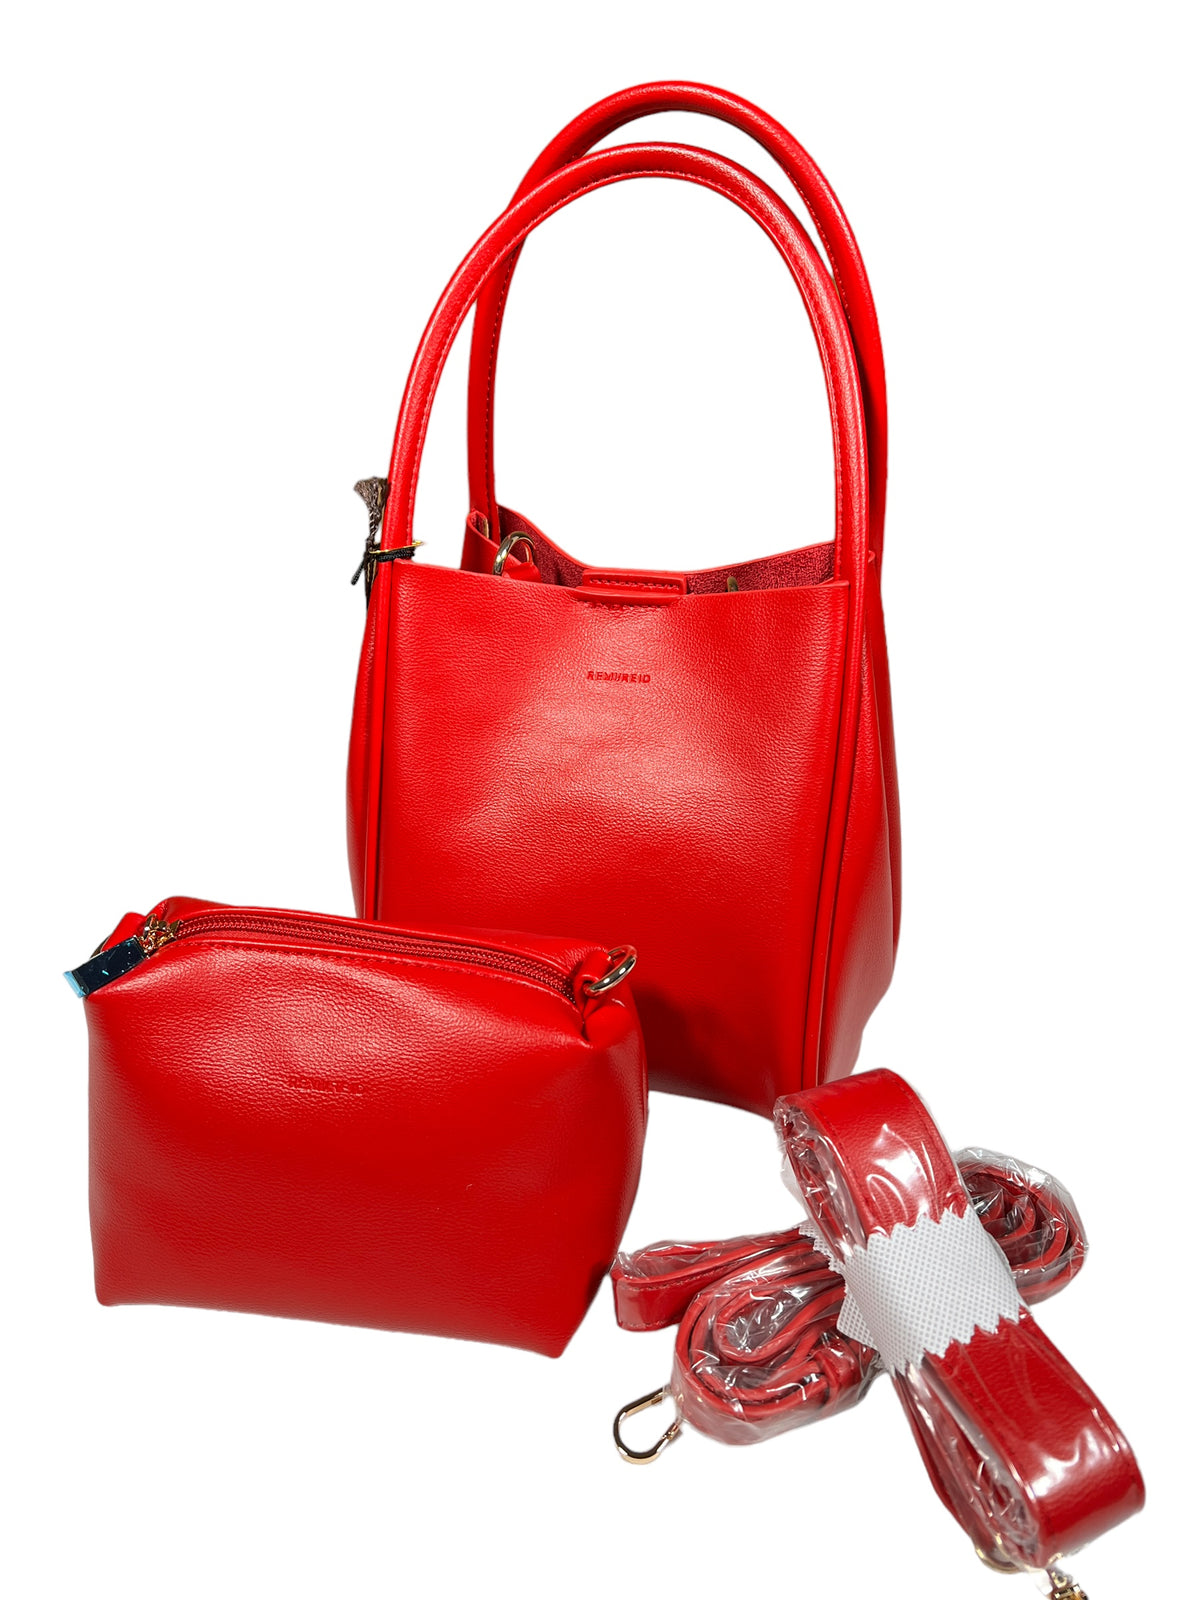 REMI/REID HOLLACE MINI TOTE BAG - RED